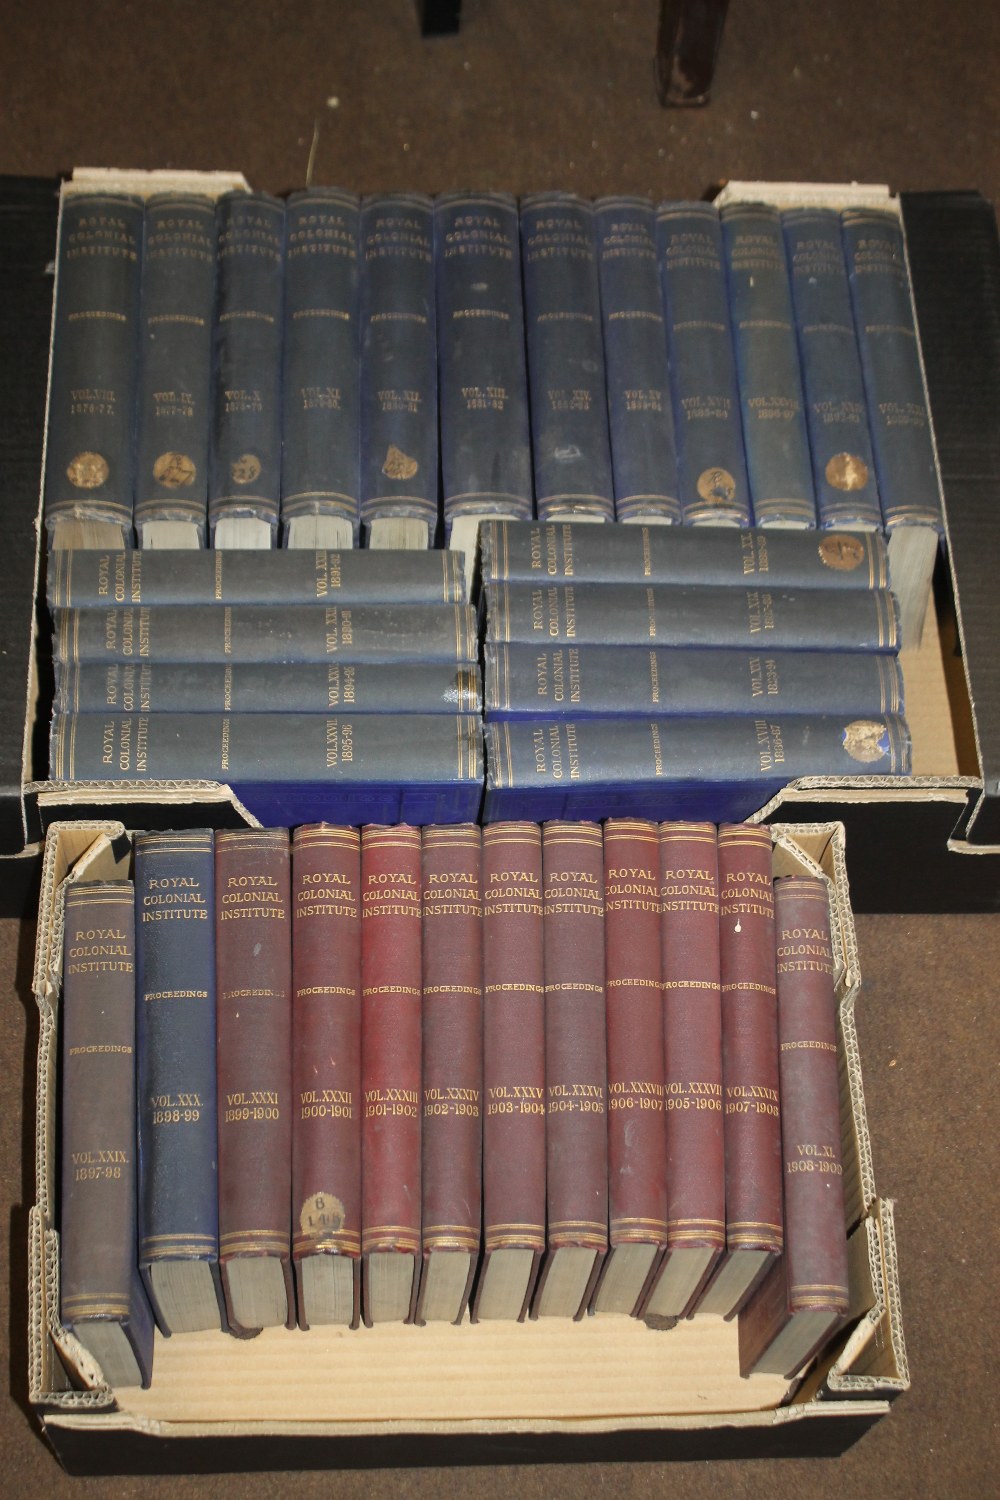 ROYAL COLONIAL INSTITUTION- TRANSACTIONS 1874-1909, 32 volumes, a runCondition Report:V